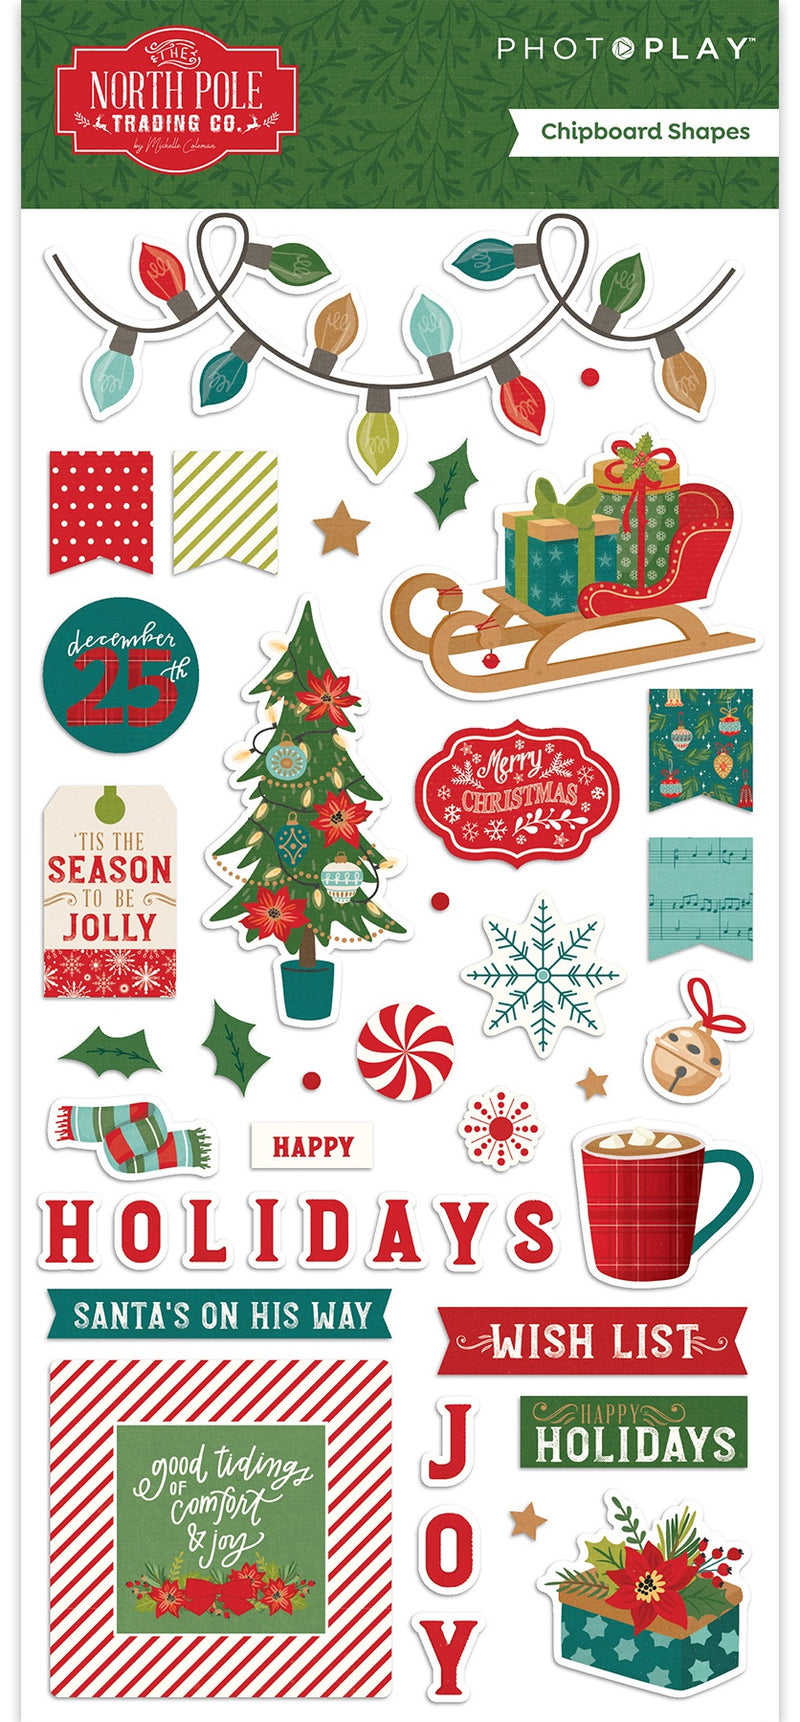 The North Pole Trading Co. Collection - 6 x 12 Chipboard